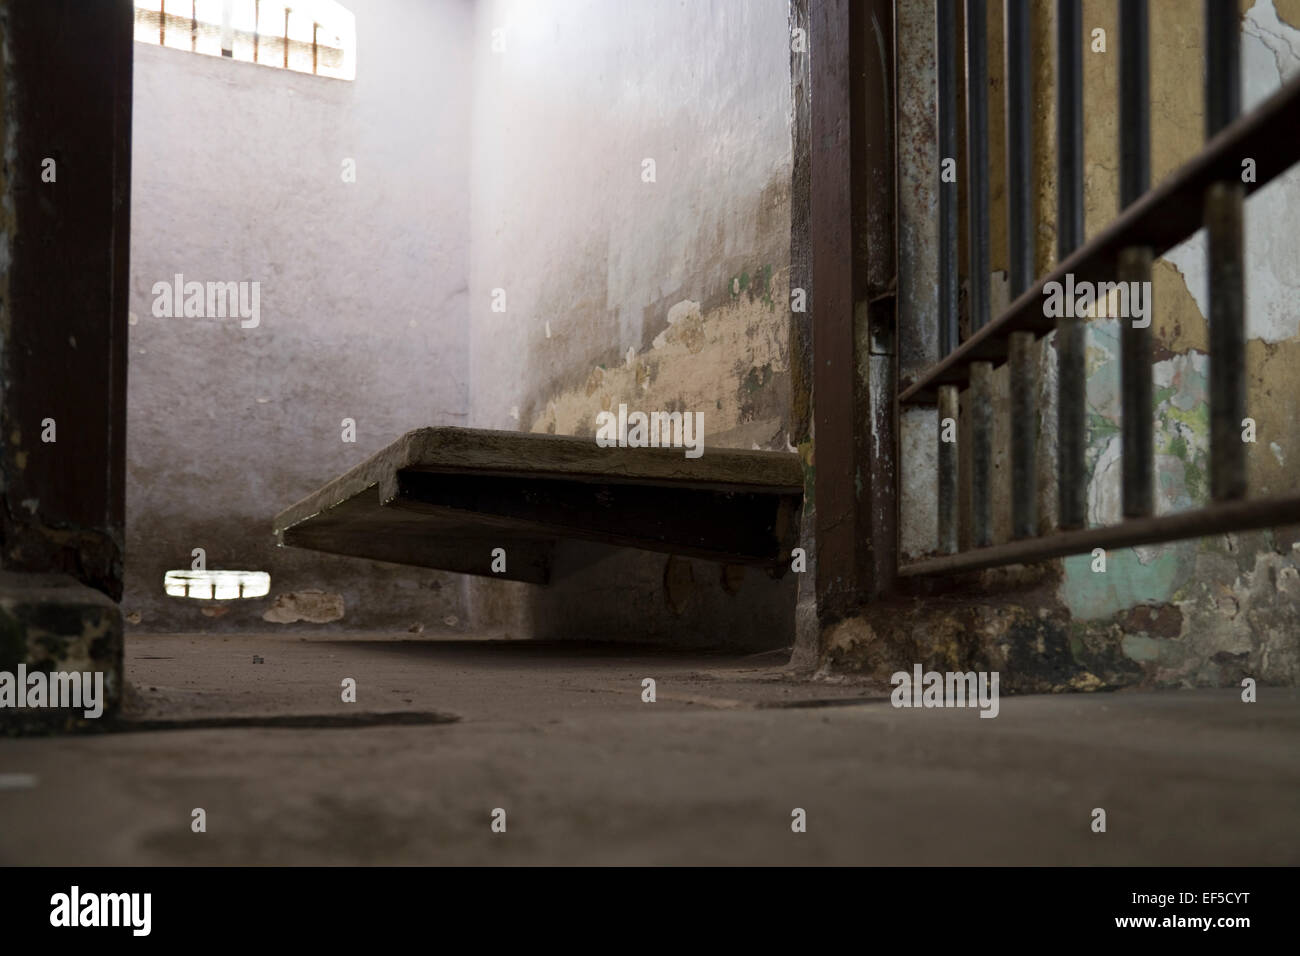 Looking into an old prison cell - concrete bed and very small window, Malaysia Stock Photo